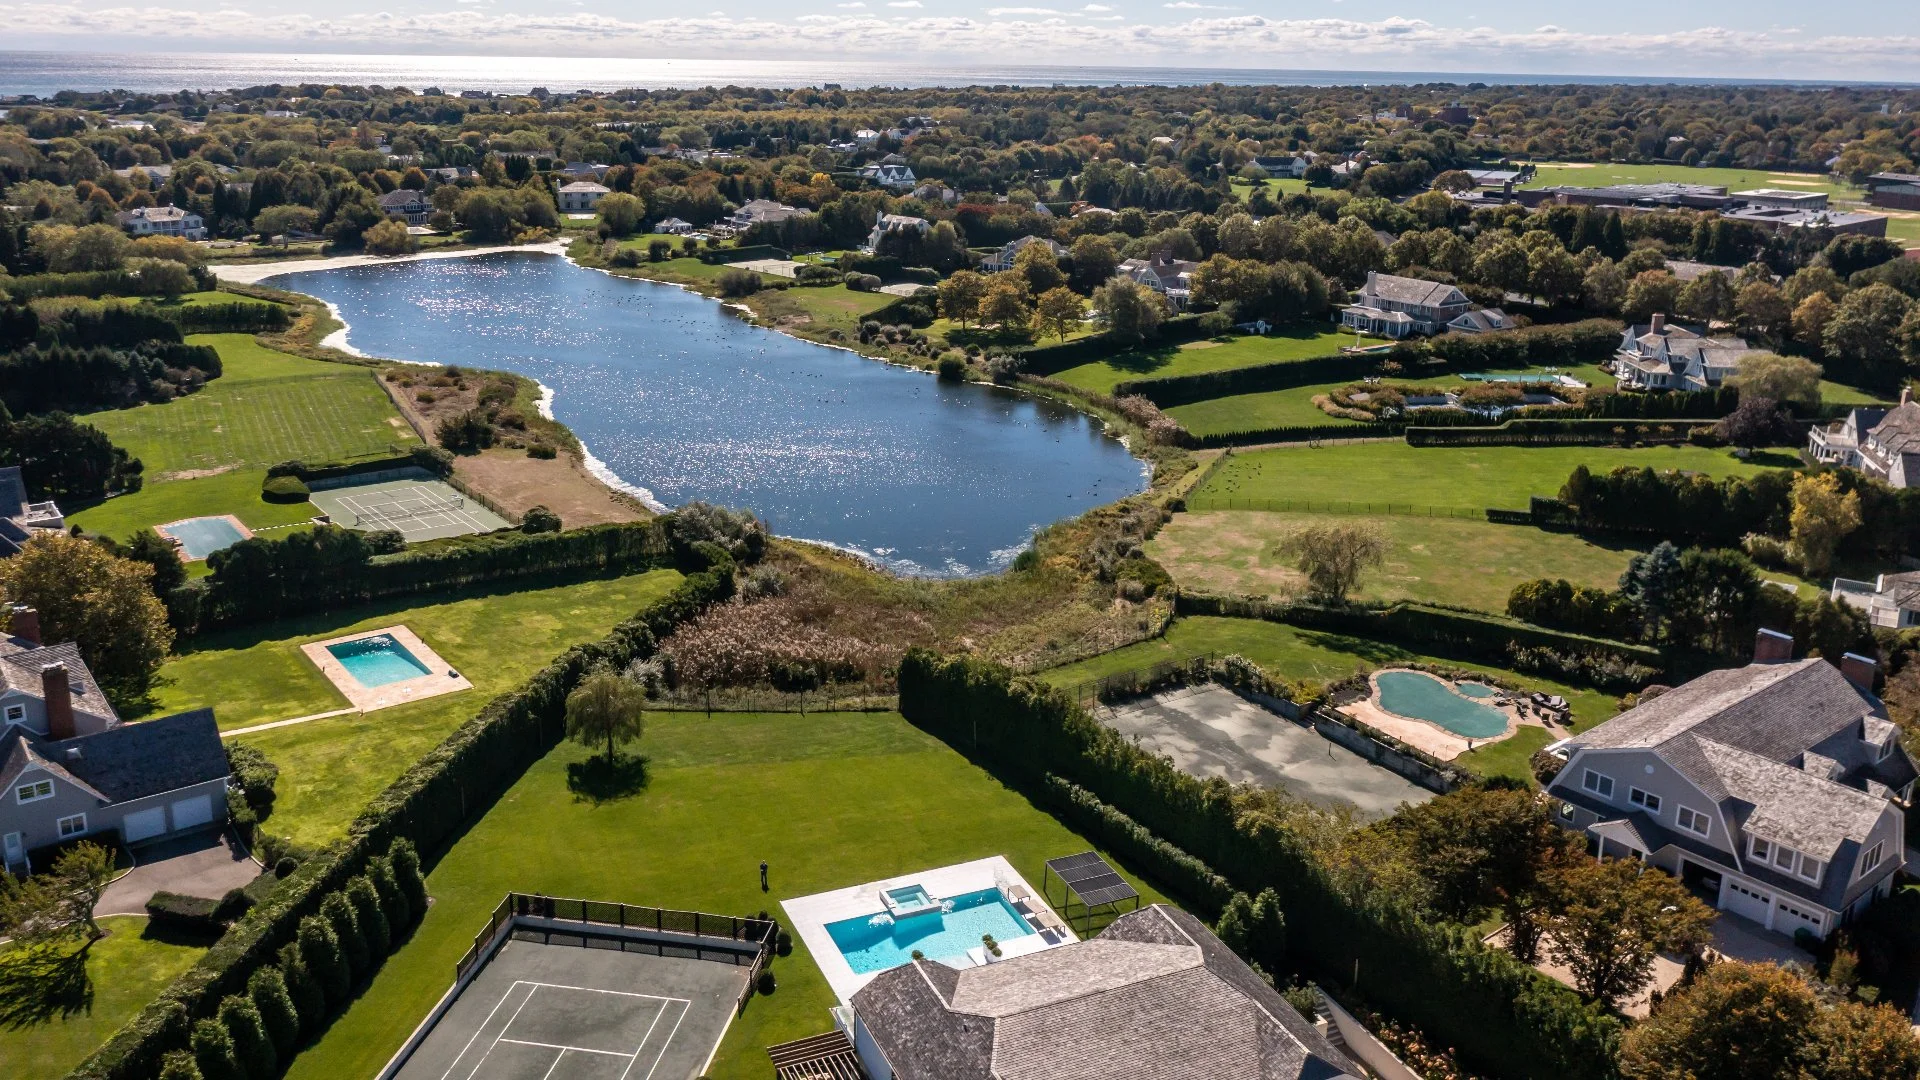 Aerial photo of pool homes in Hamptons, NY.